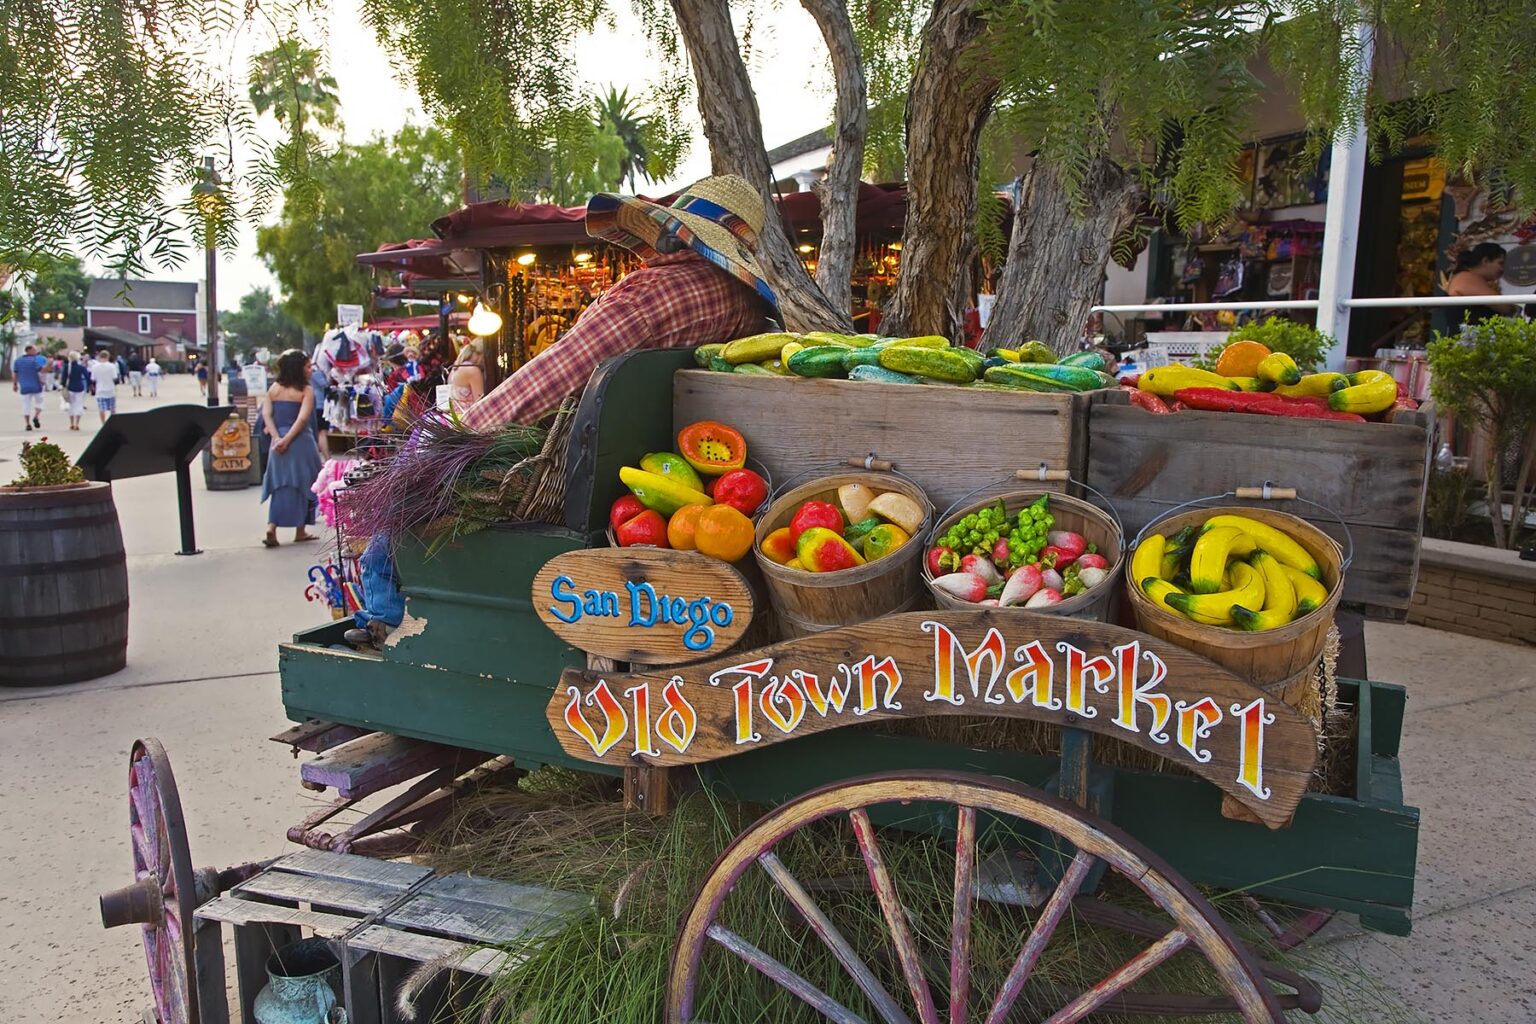 PRODUCE is sold outside at the OLD TOWN MARKET - SAN DIEGO, CALIFORNIA